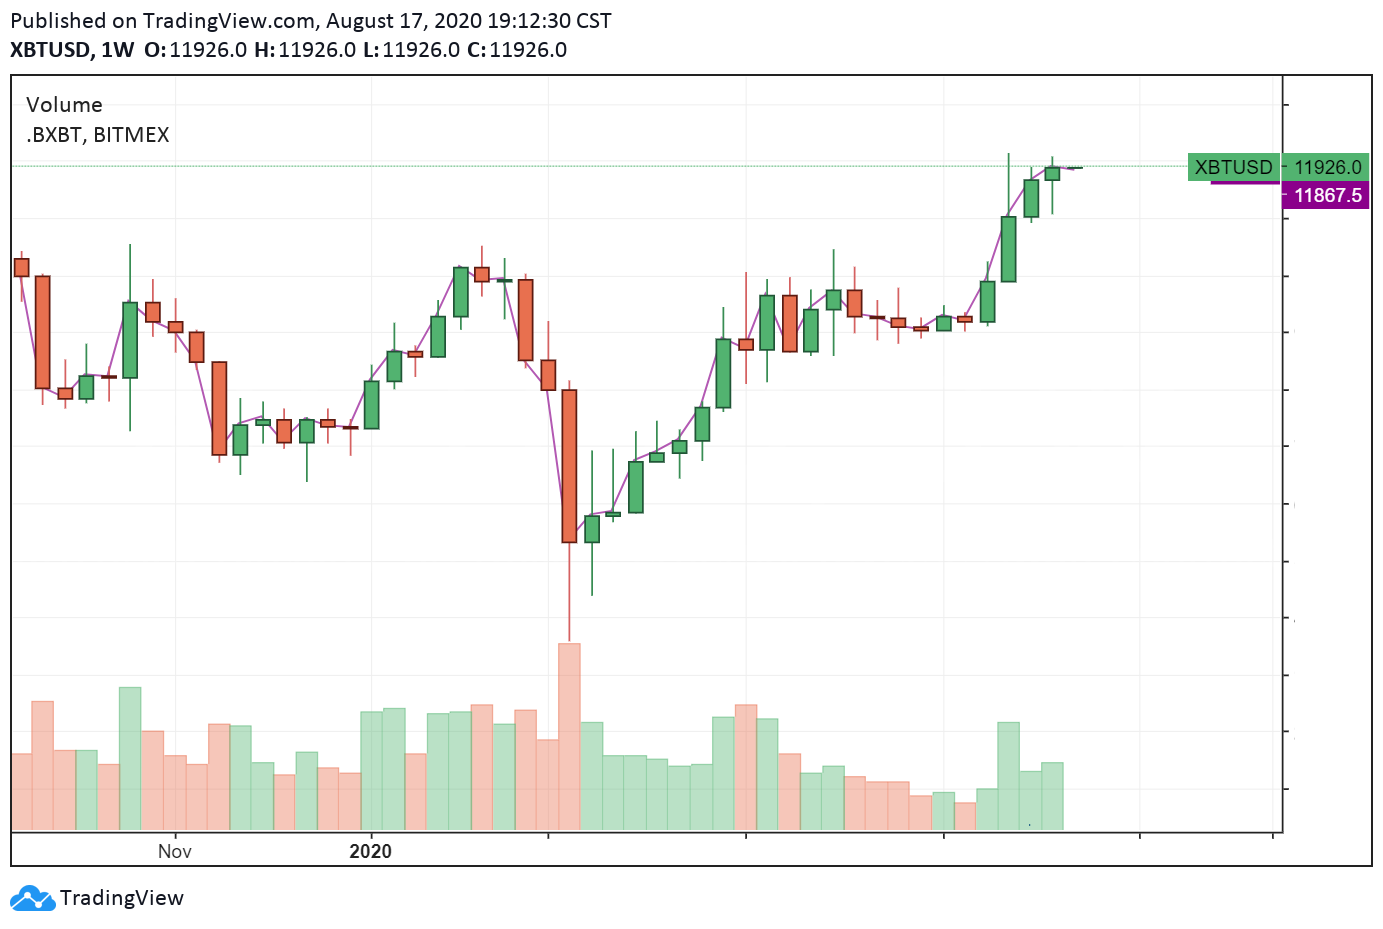 The weekly chart of Bitcoin